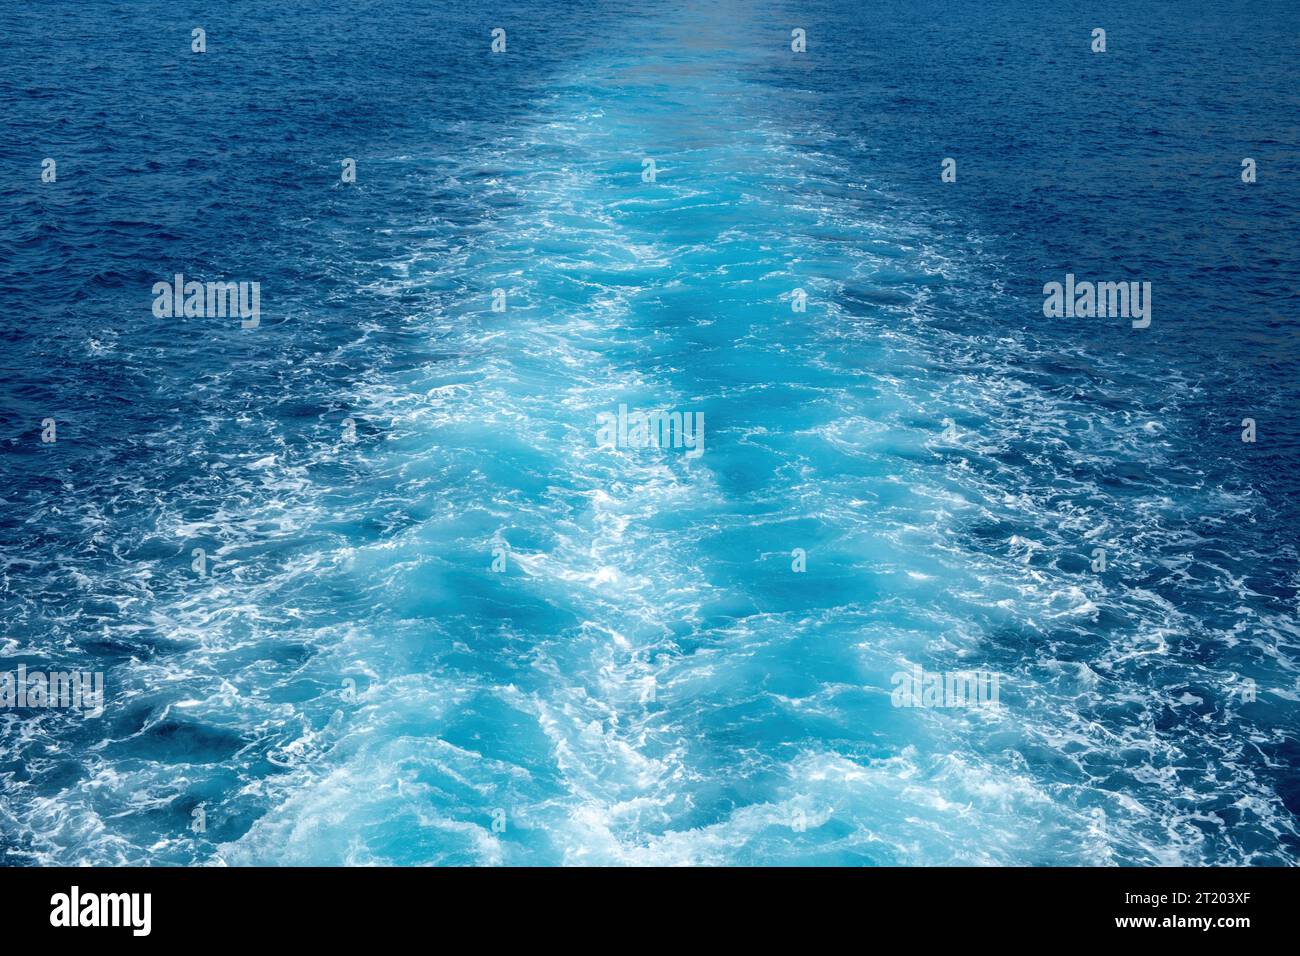 Boat white wake, prop wash foam on blue sea background texture. Ripple wavy deep water spray and splash behind ship. Space Stock Photo